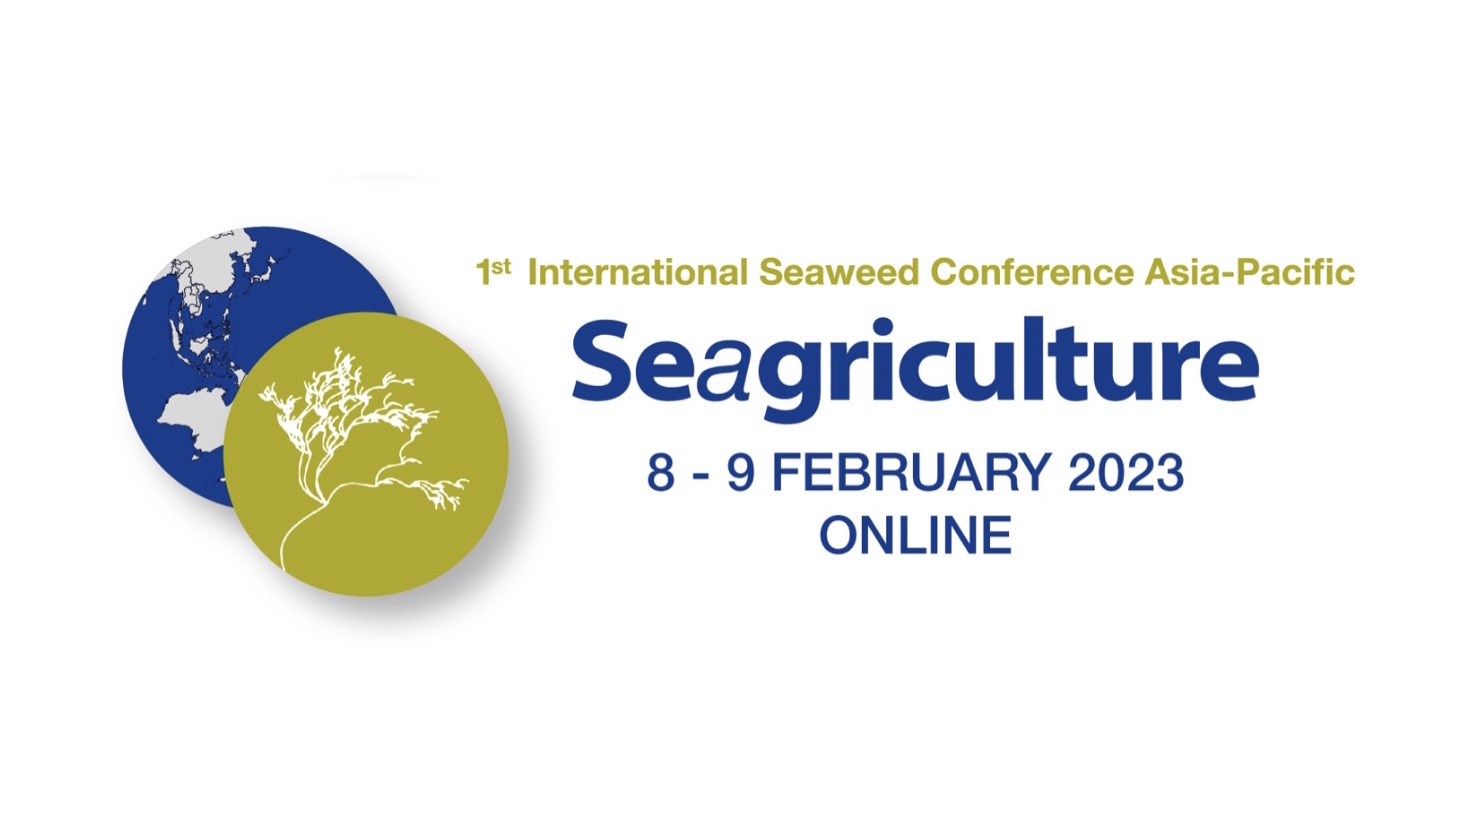 Seagriculture AsiaPacific 2023 1st International Seaweed Conference